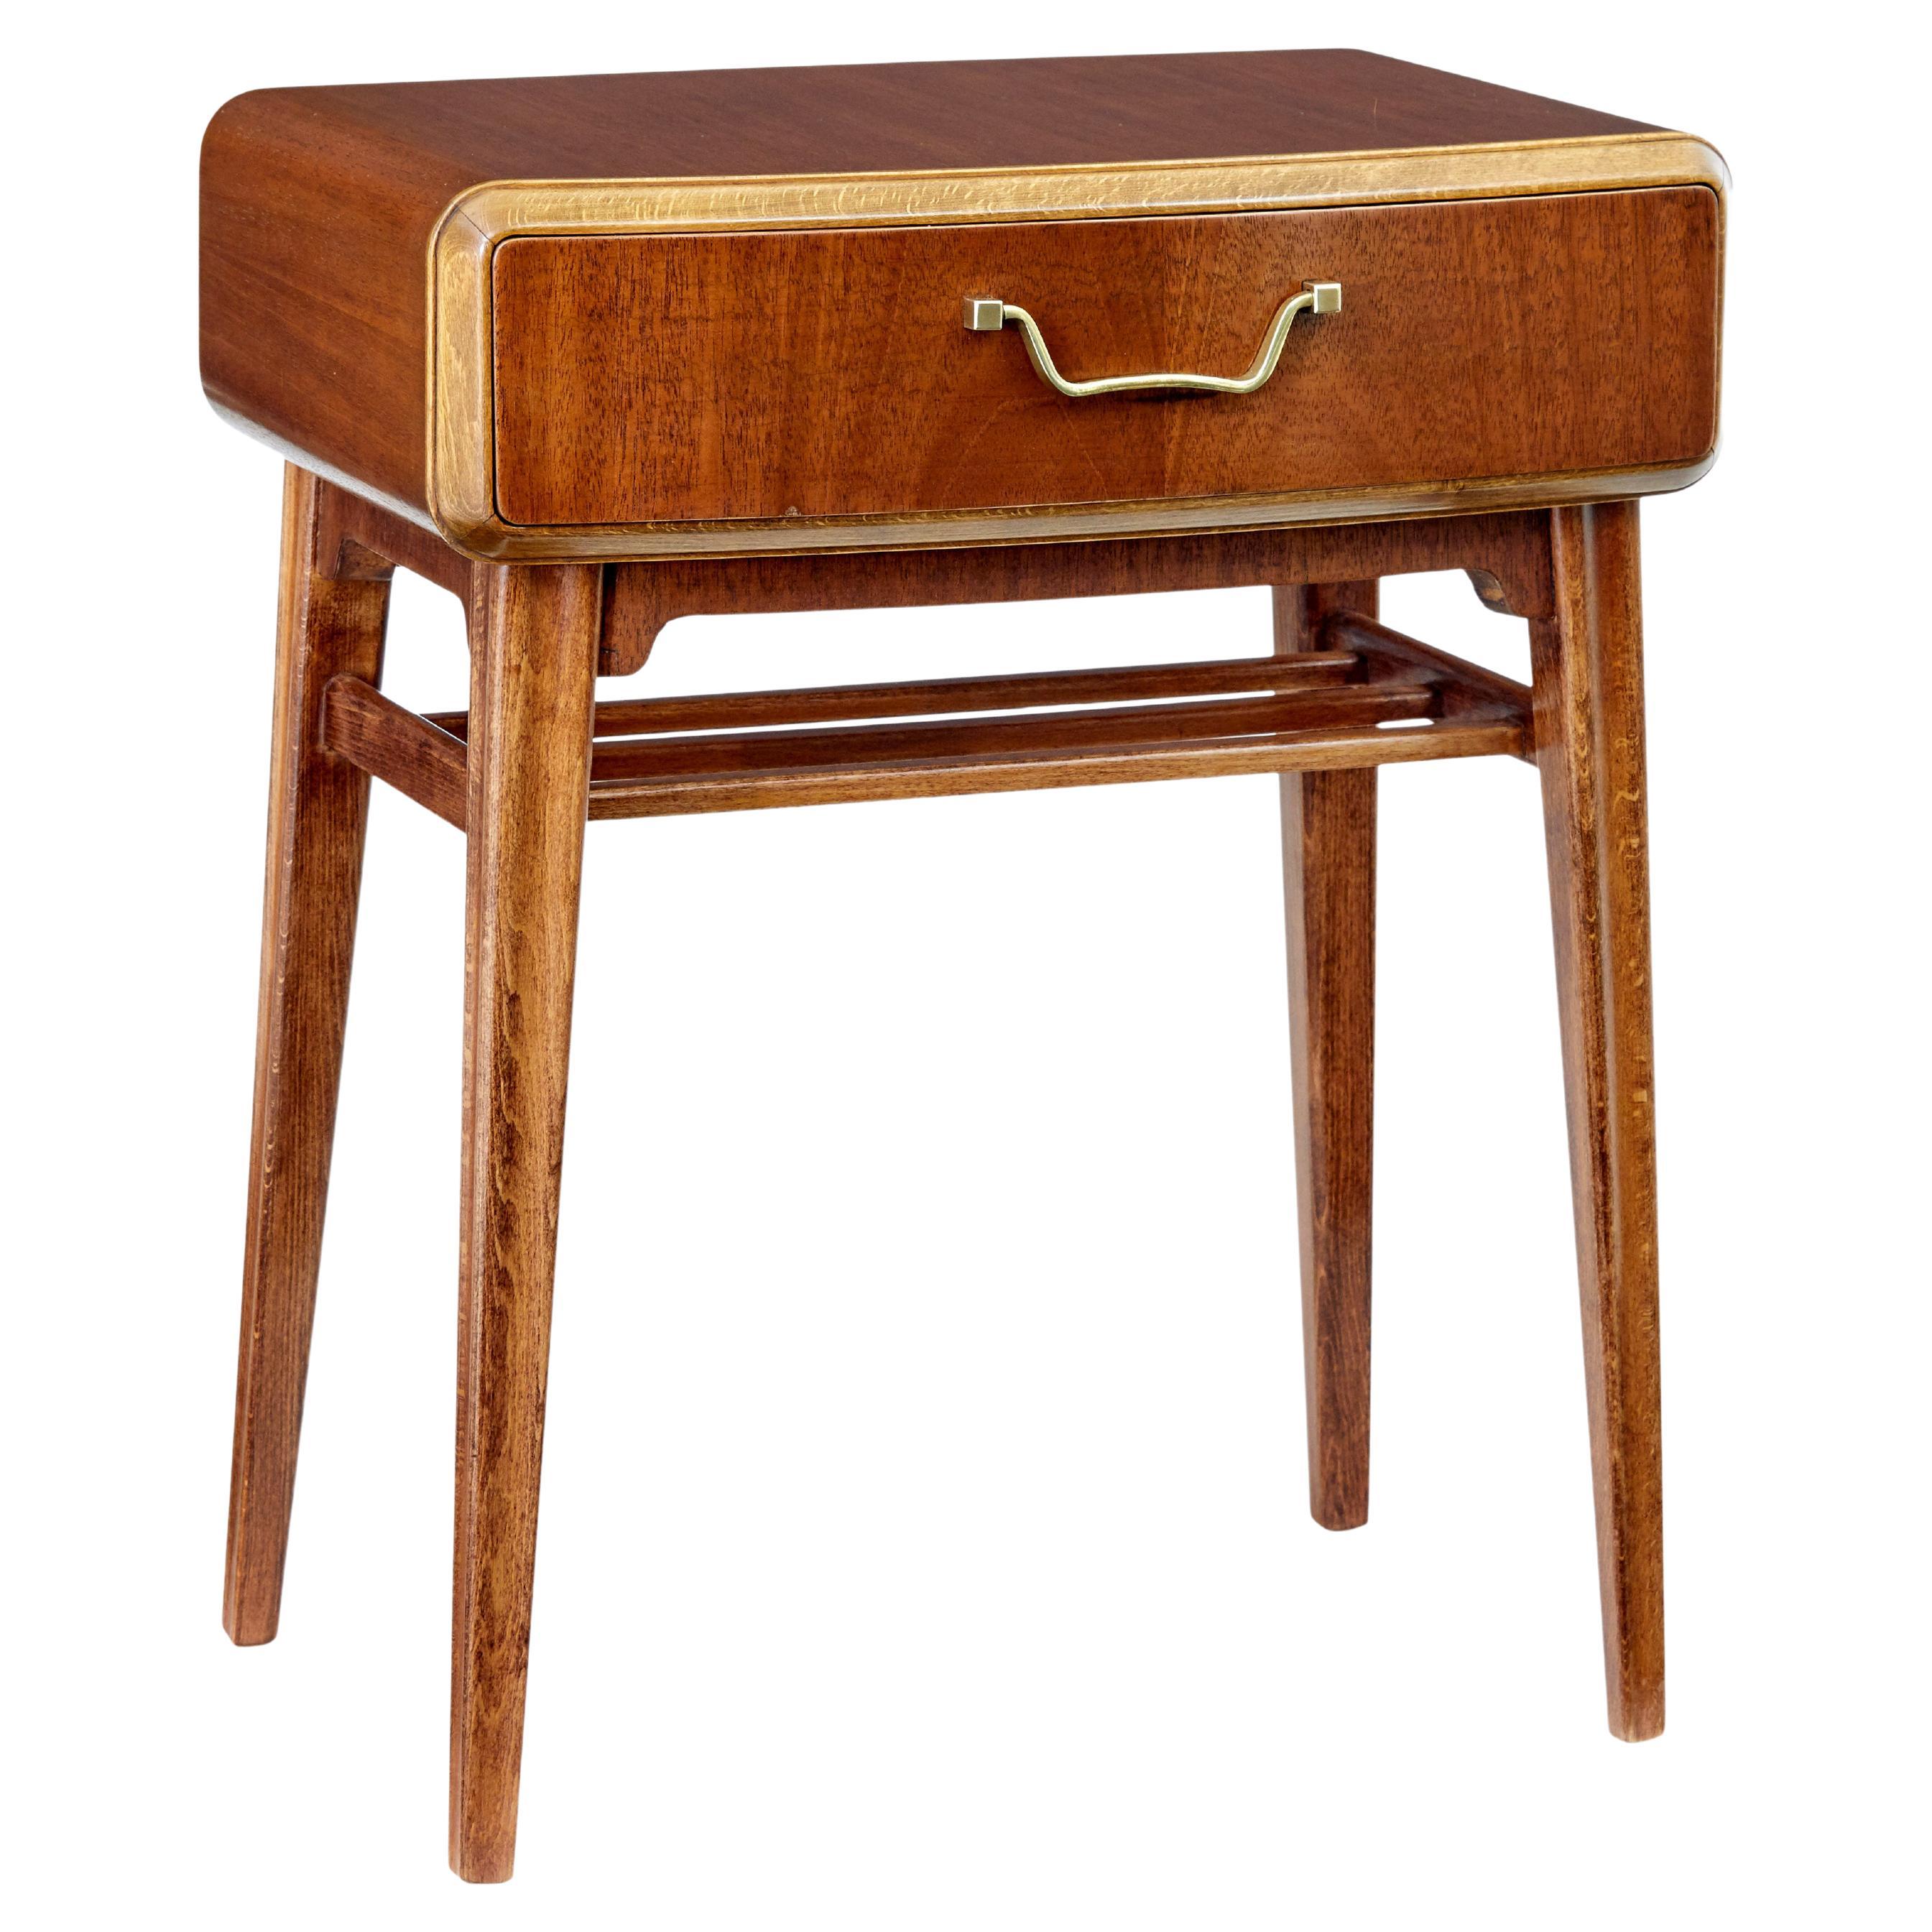 Mid-20th Century Mahogany Bedside Table by Bodafors For Sale